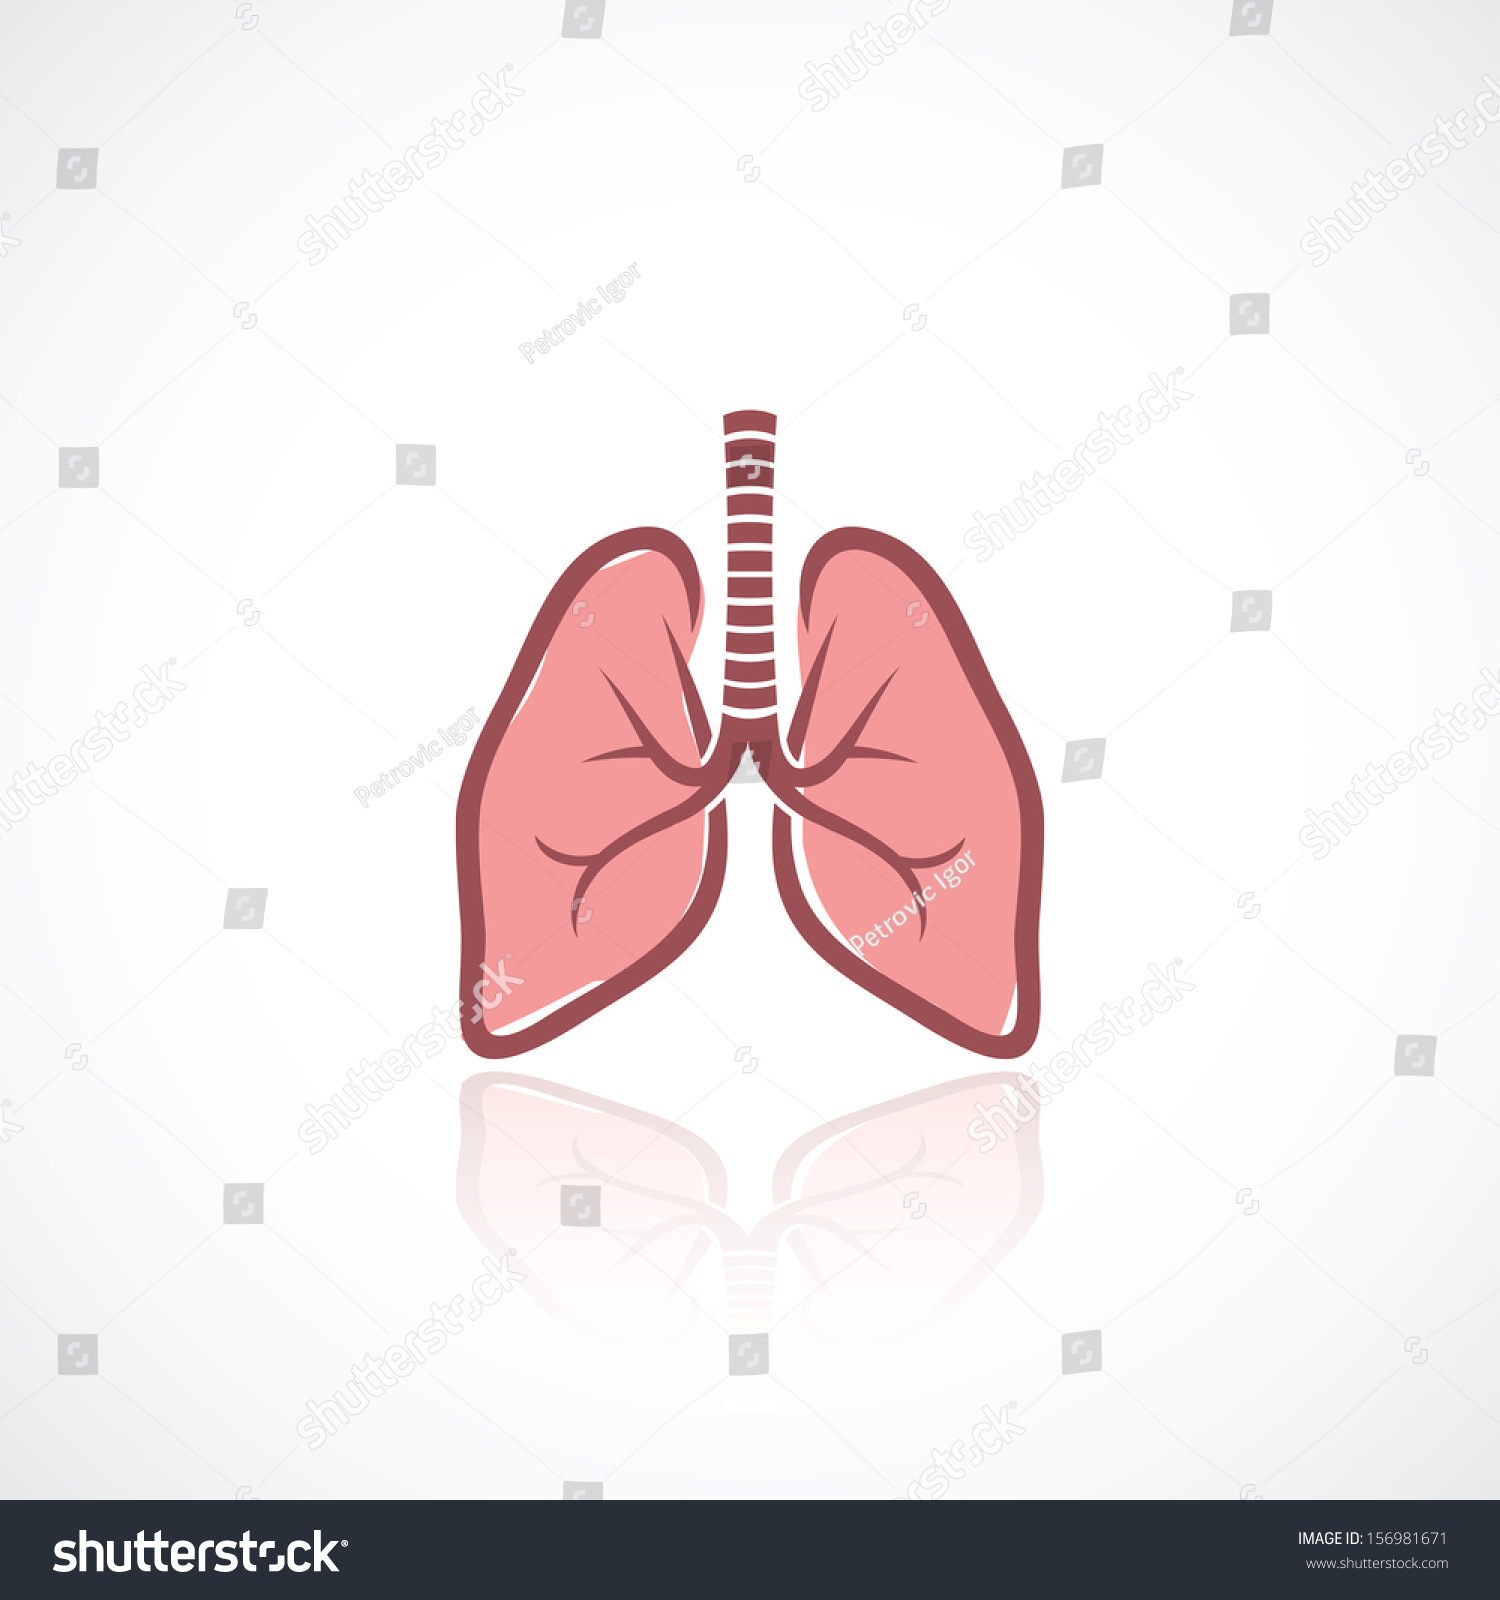 lungs clipart vector - photo #45